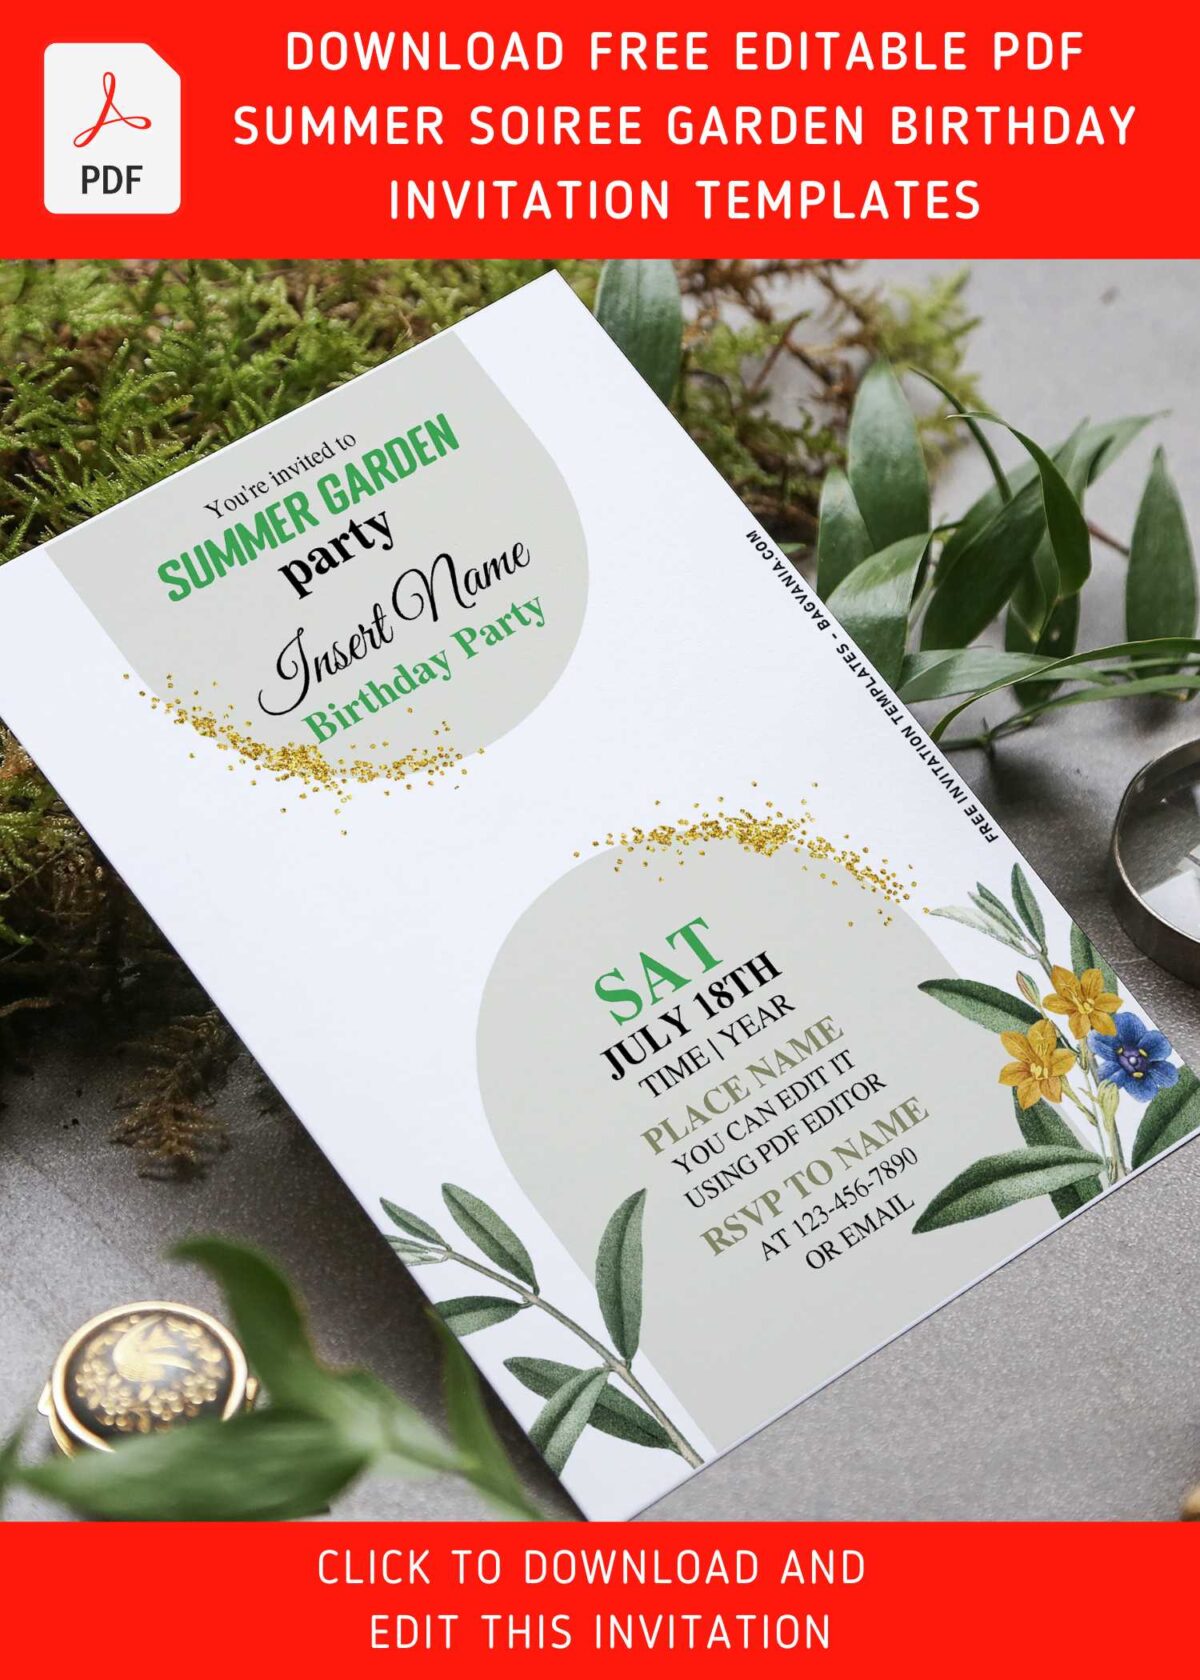 (Free Editable PDF) Lively Garden Soiree Birthday Invitation Templates with tropical summer greenery and floral decorations